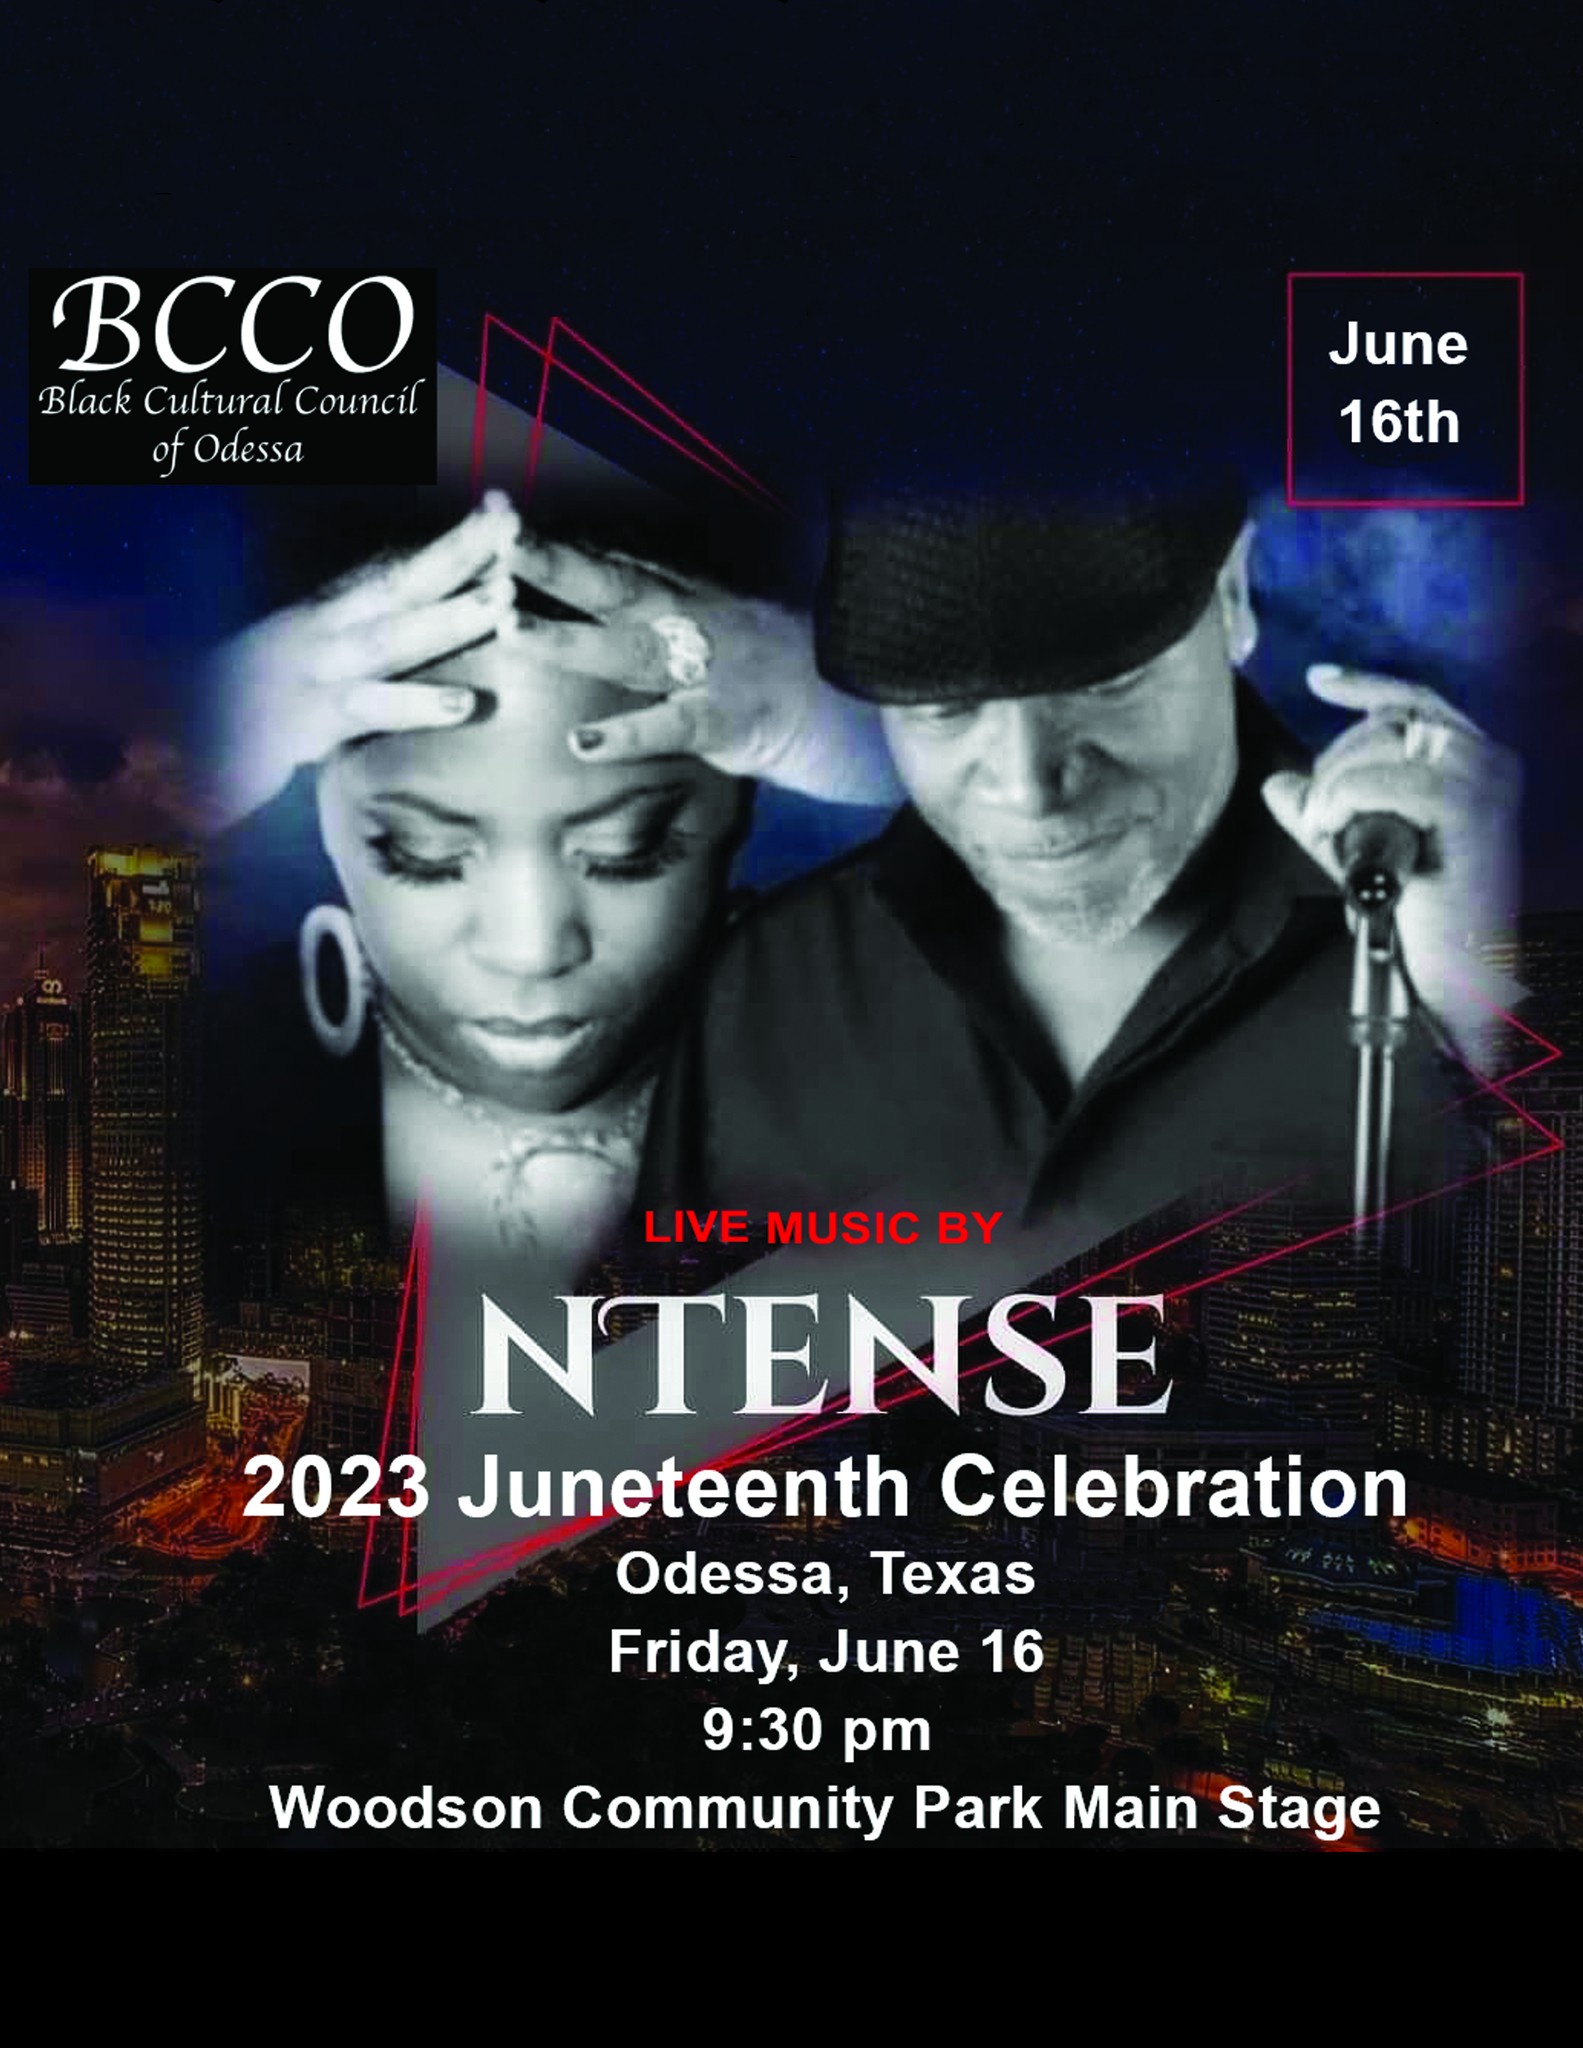 Live Music By NTENSE at Juneteenth Celebration in Odessa, TX